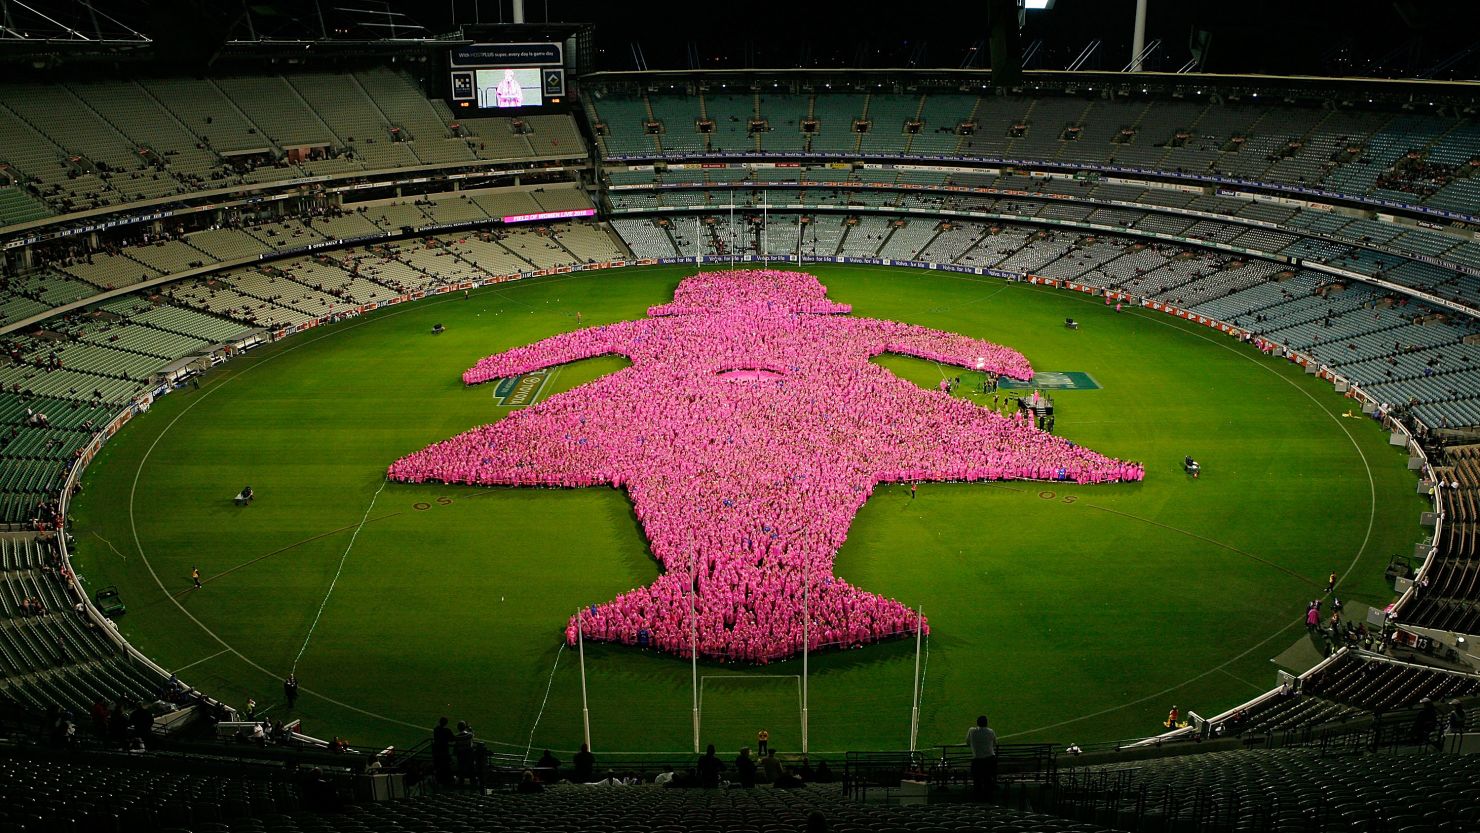 A  'Field of Women' formed to raise funds for Breast Cancer Network Australia at Melbourne Cricket Ground on May 7, 2010.